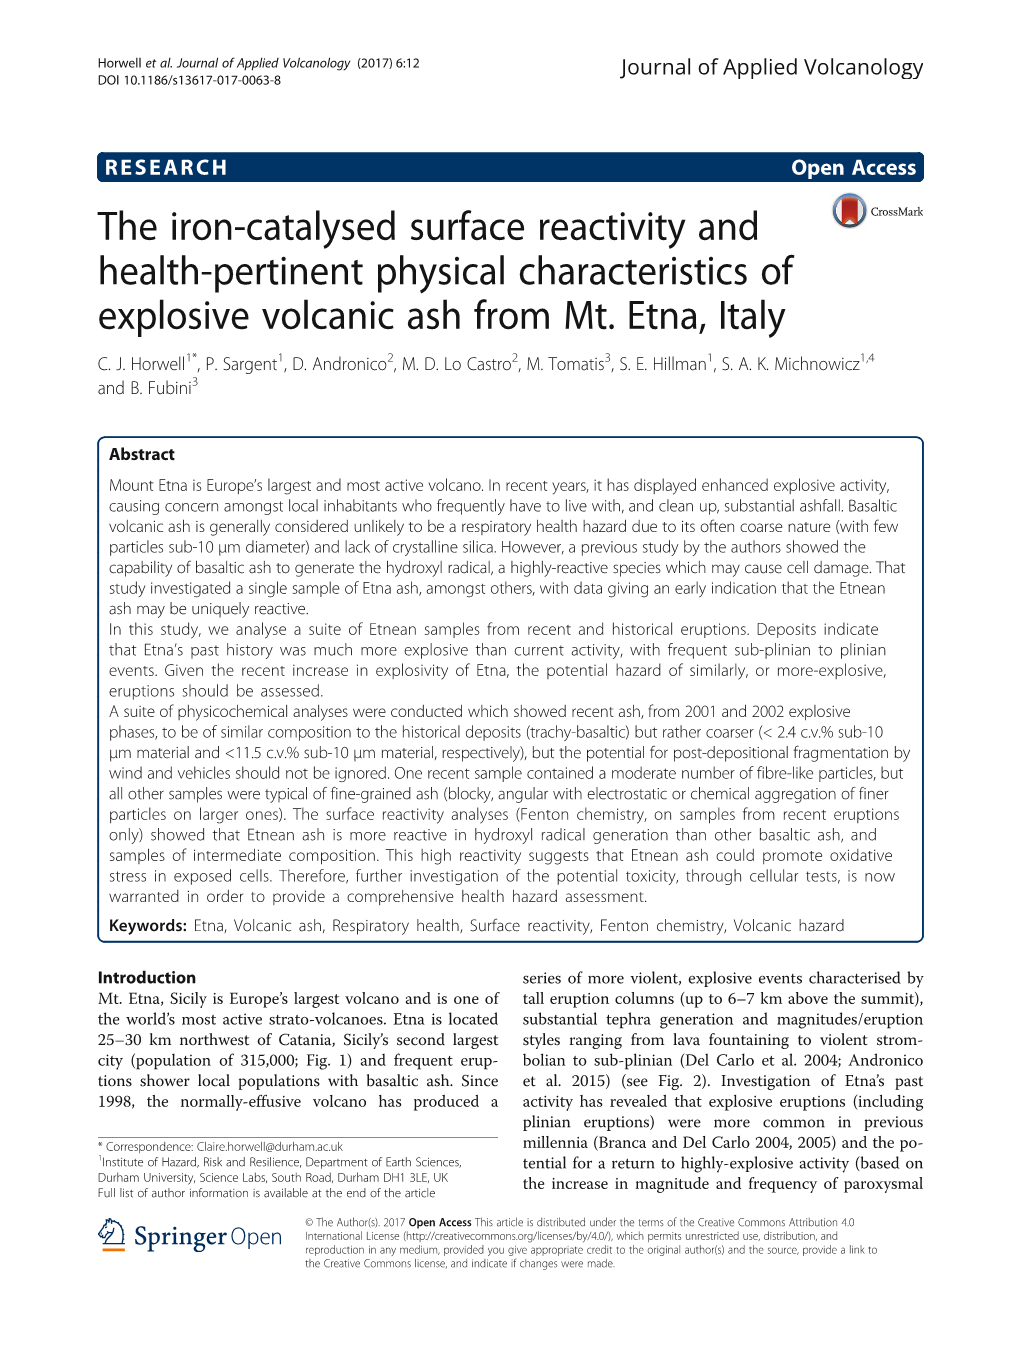 The Iron-Catalysed Surface Reactivity and Health-Pertinent Physical Characteristics of Explosive Volcanic Ash from Mt. Etna, Italy C